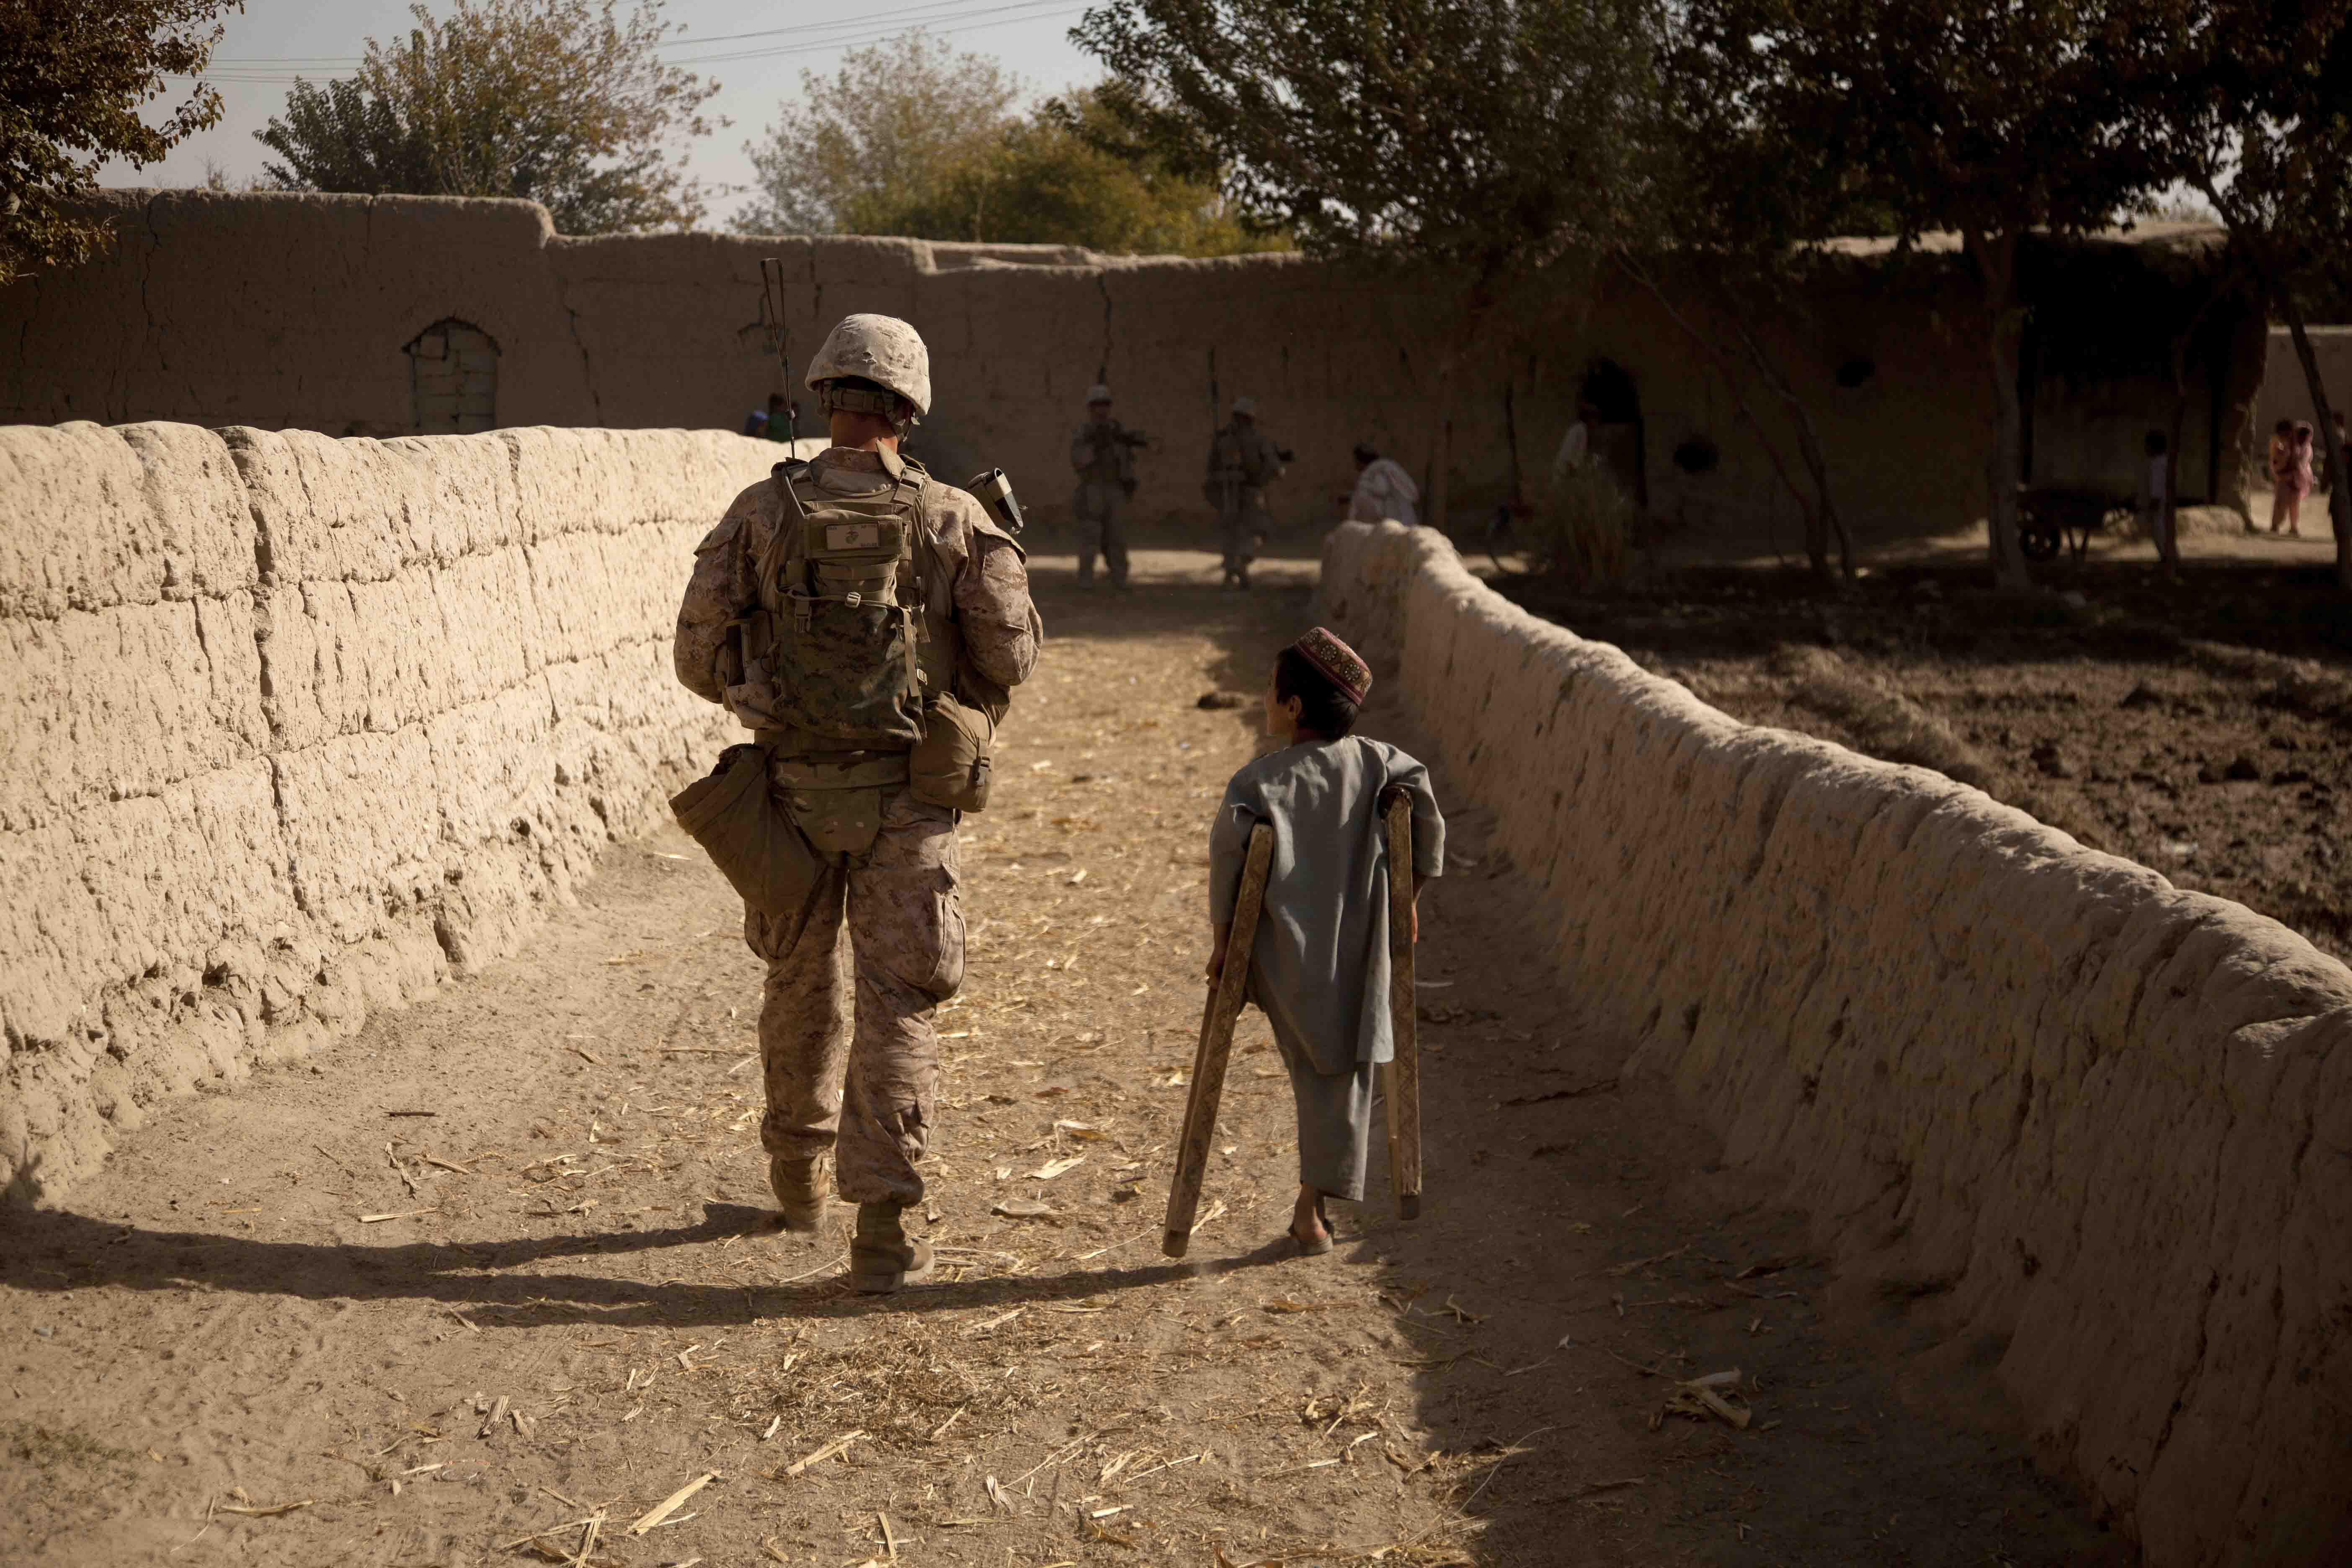 India Company’s Cpl Jacob Marler patrols through the Southern Green Zone alongside one of the many Afghan children caught in the struggle between the Marines and the Taliban. (U.S. Marine Corps photo by LCpl Armando Mendoza)